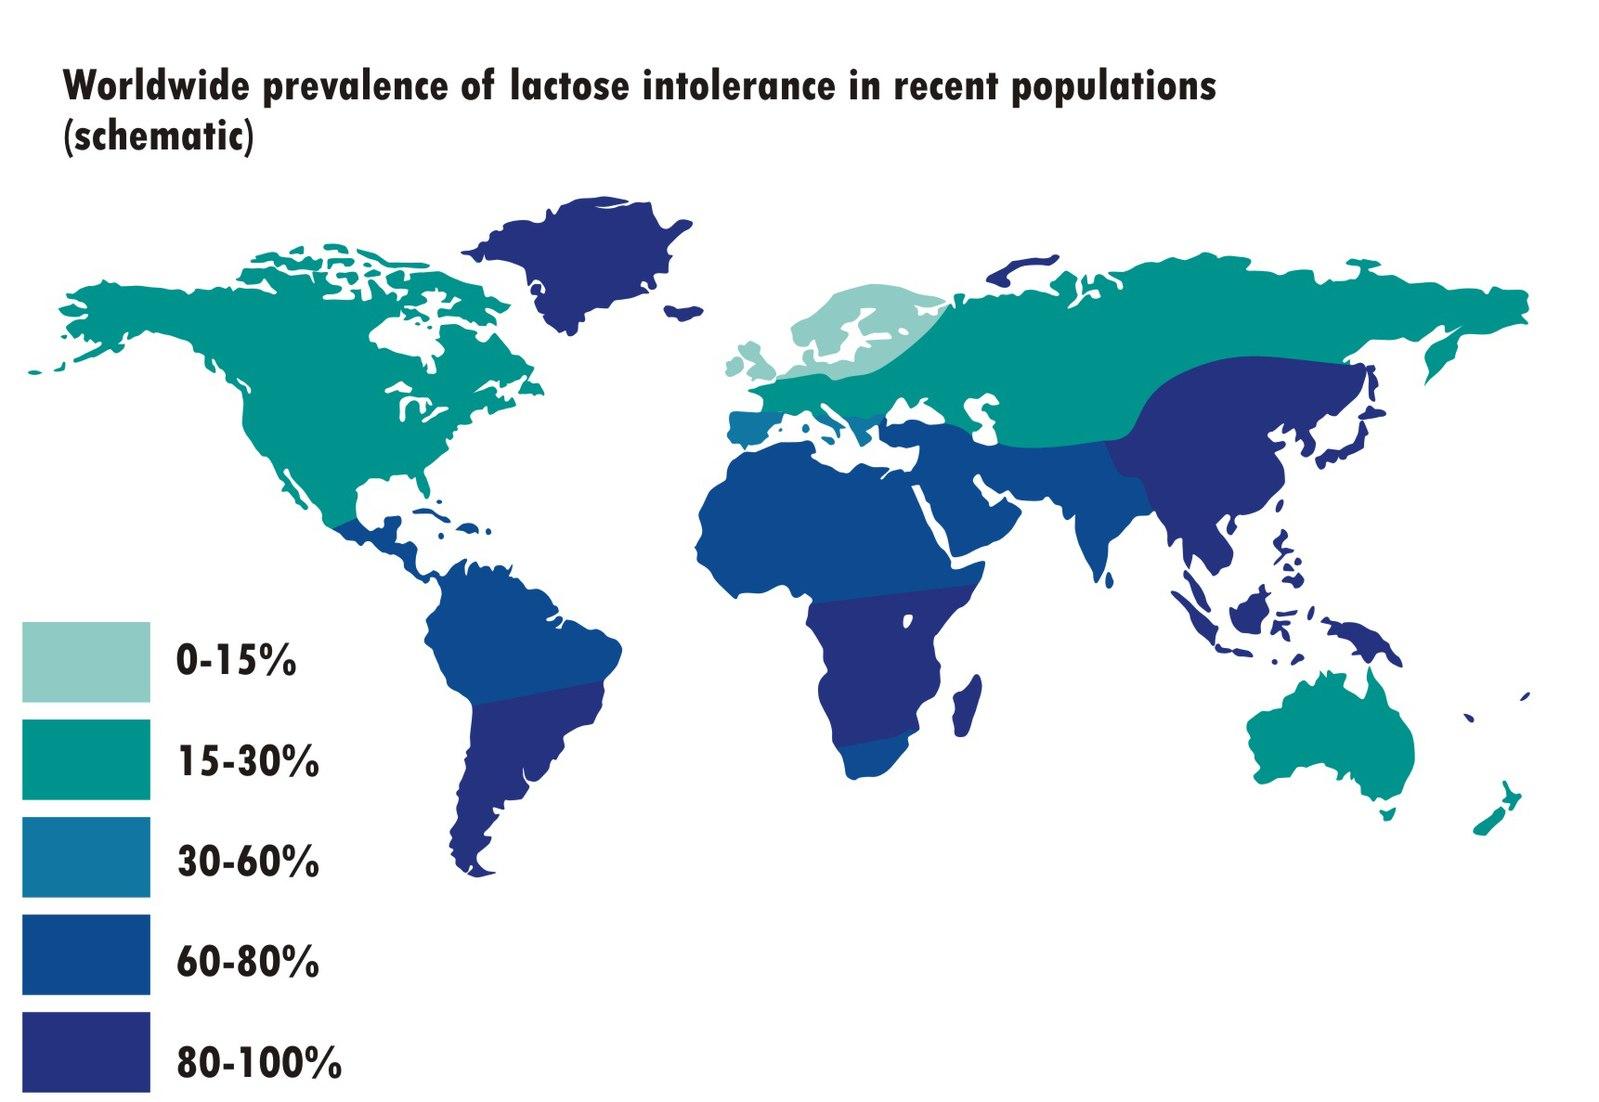 A world map shows the prevalence of lactose intolerance. Areas with the greatest prevalence of lactose intolerance (60% and higher) include Asia, the Middle East, Africa, South America, and Greenland. Lactose intolerance is rarer (less than 30%) in North America, western Europe, Australia, and New Zealand.